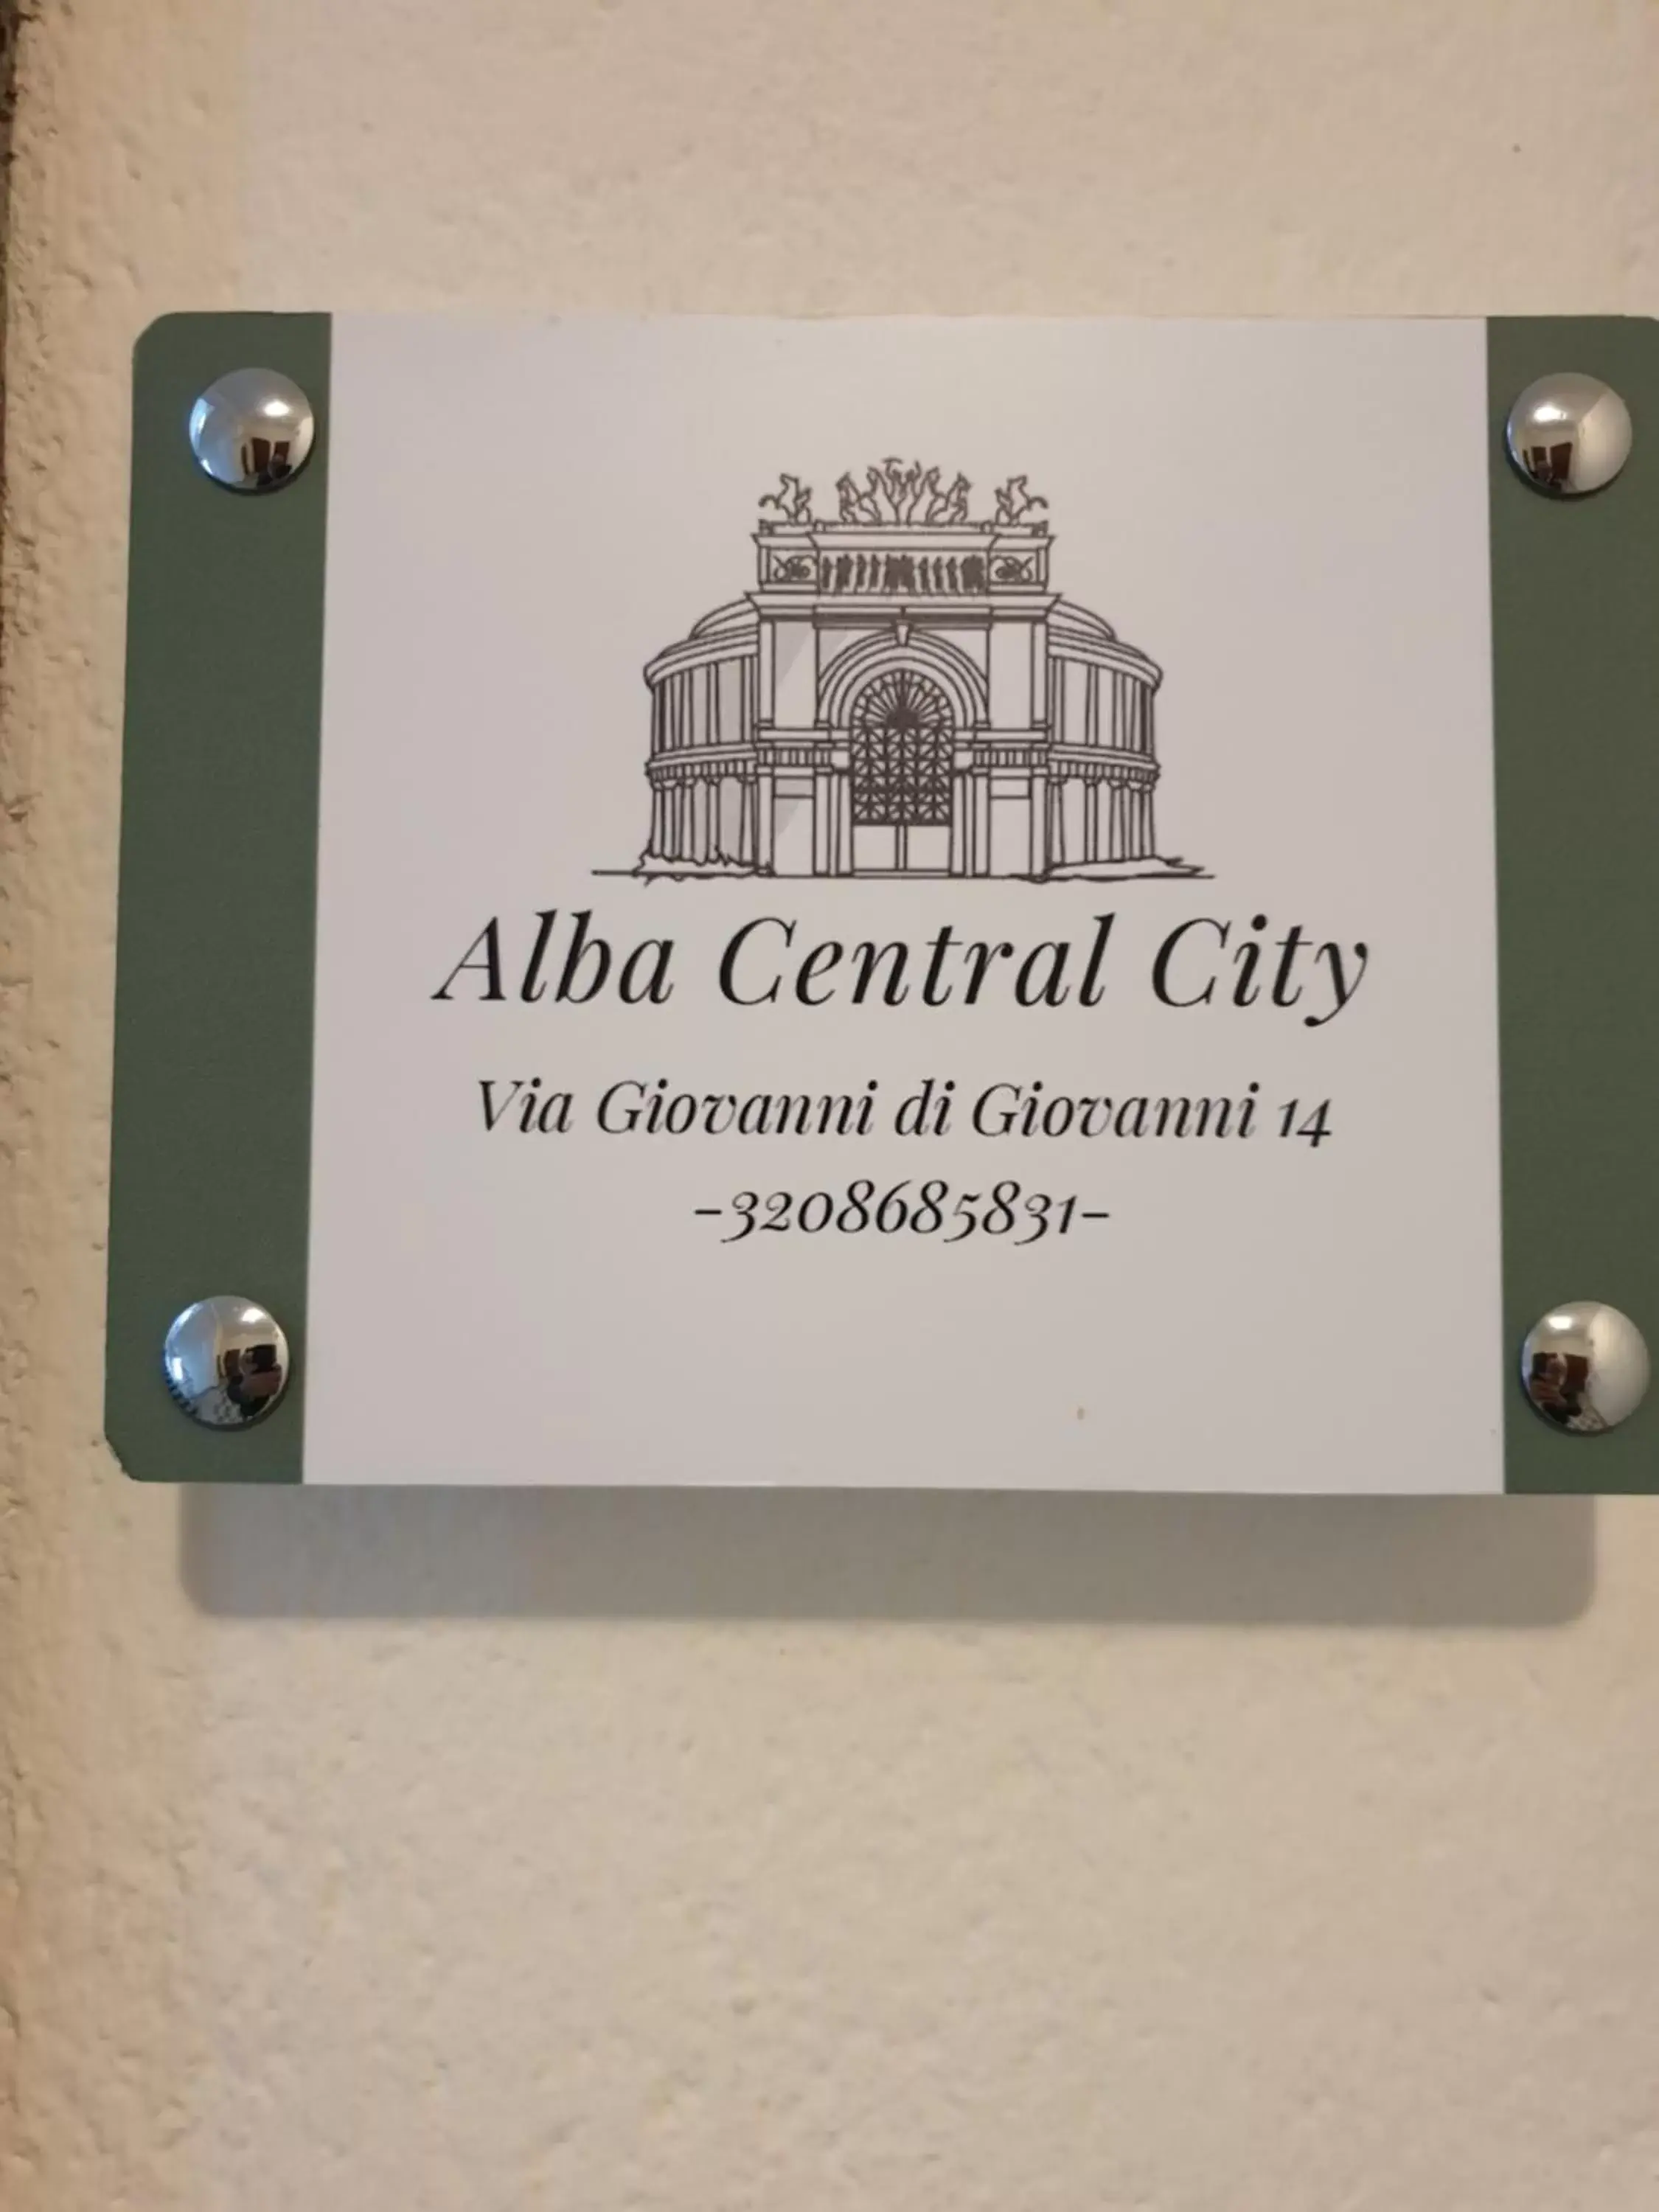 Property logo or sign in Alba central City